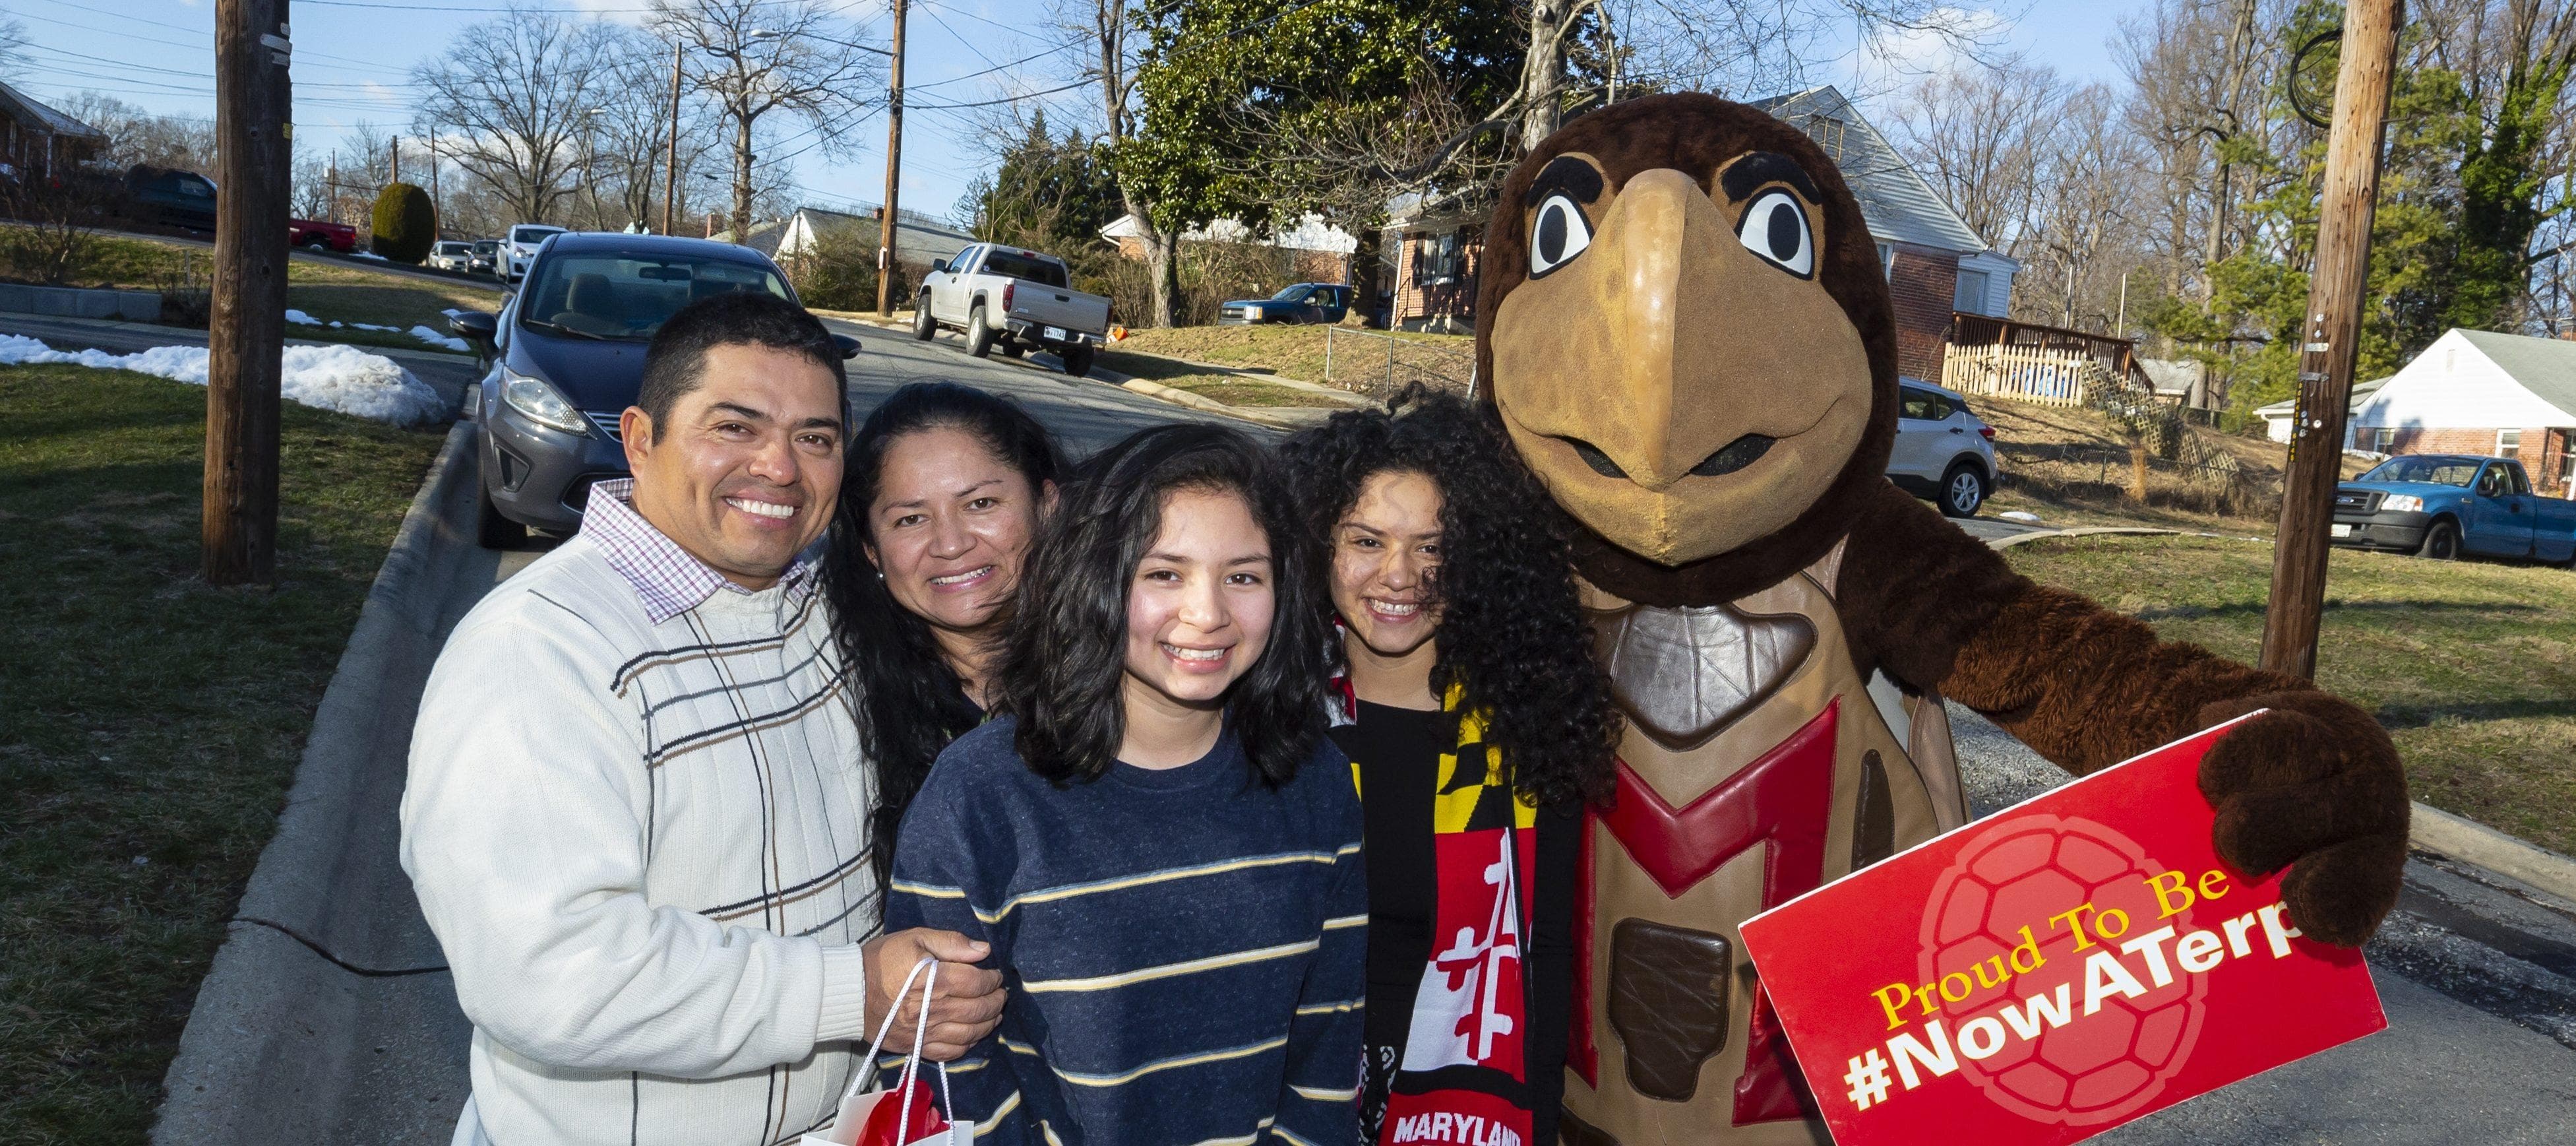 Family posing with Testudo, UMD's mascot and a sign that says "Proud to be #NowATerp".